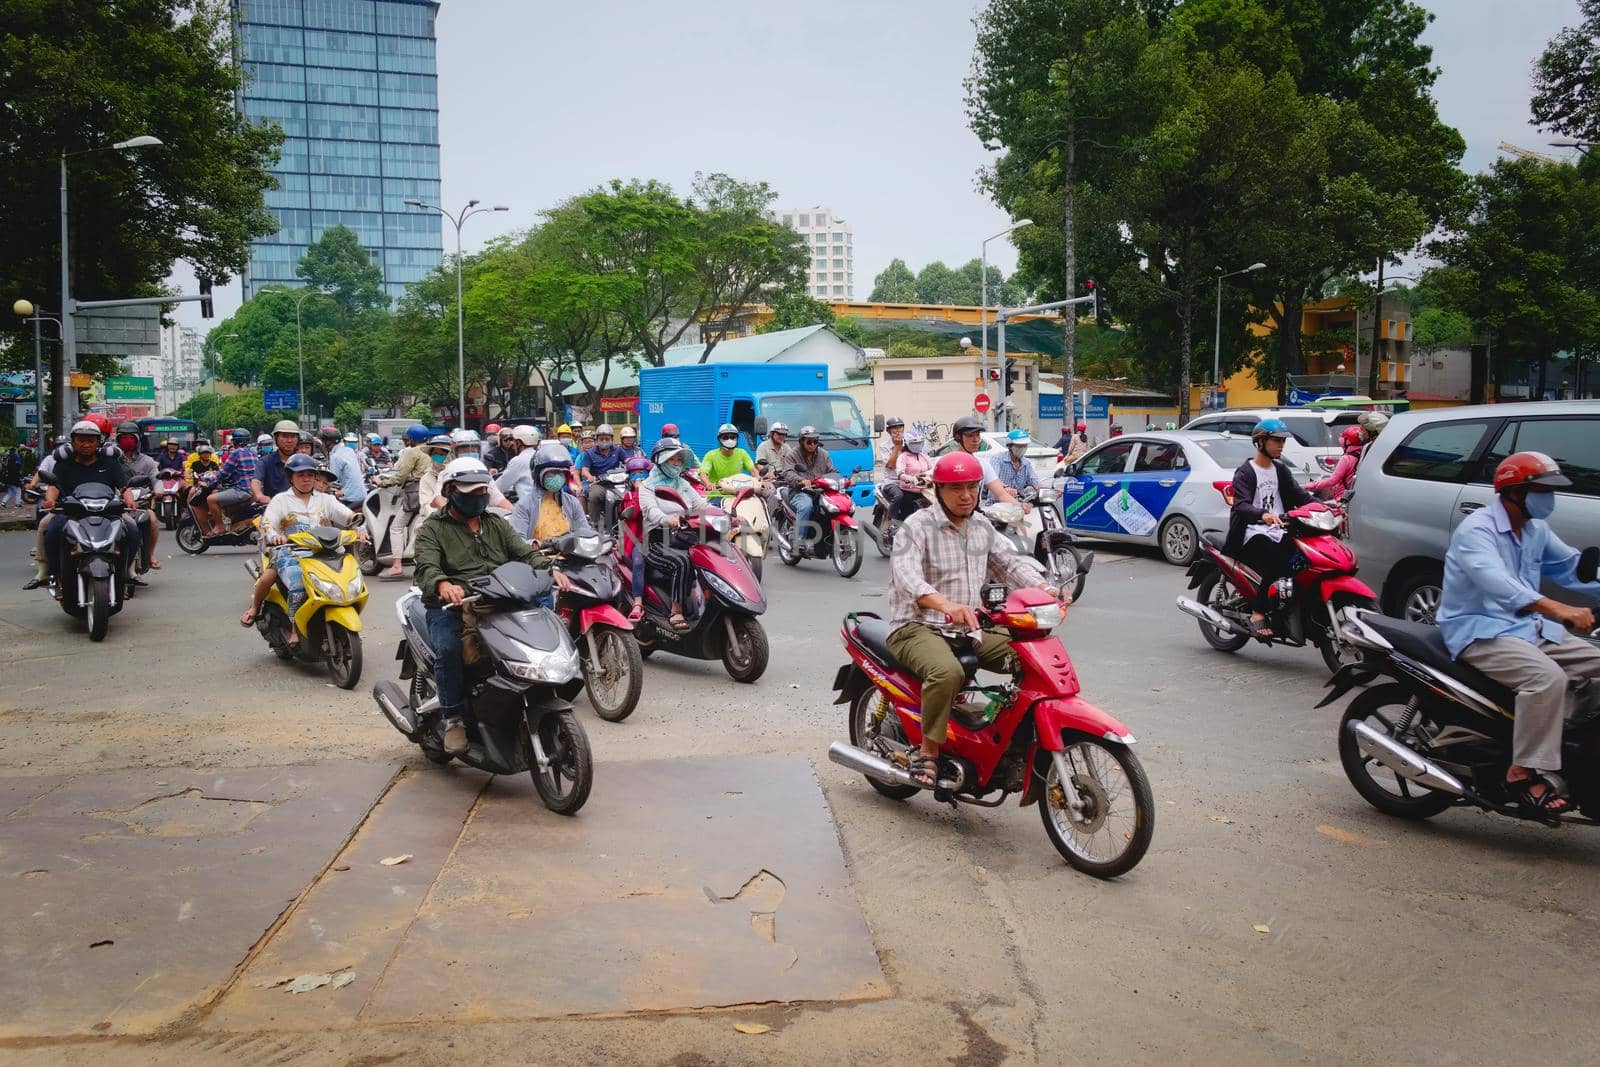 2019-11-10 / Ho Chi Minh City, Vietnam - Urban scene in rush hour. Motorcycles flood the chaotic traffic flow of the city. by hernan_hyper